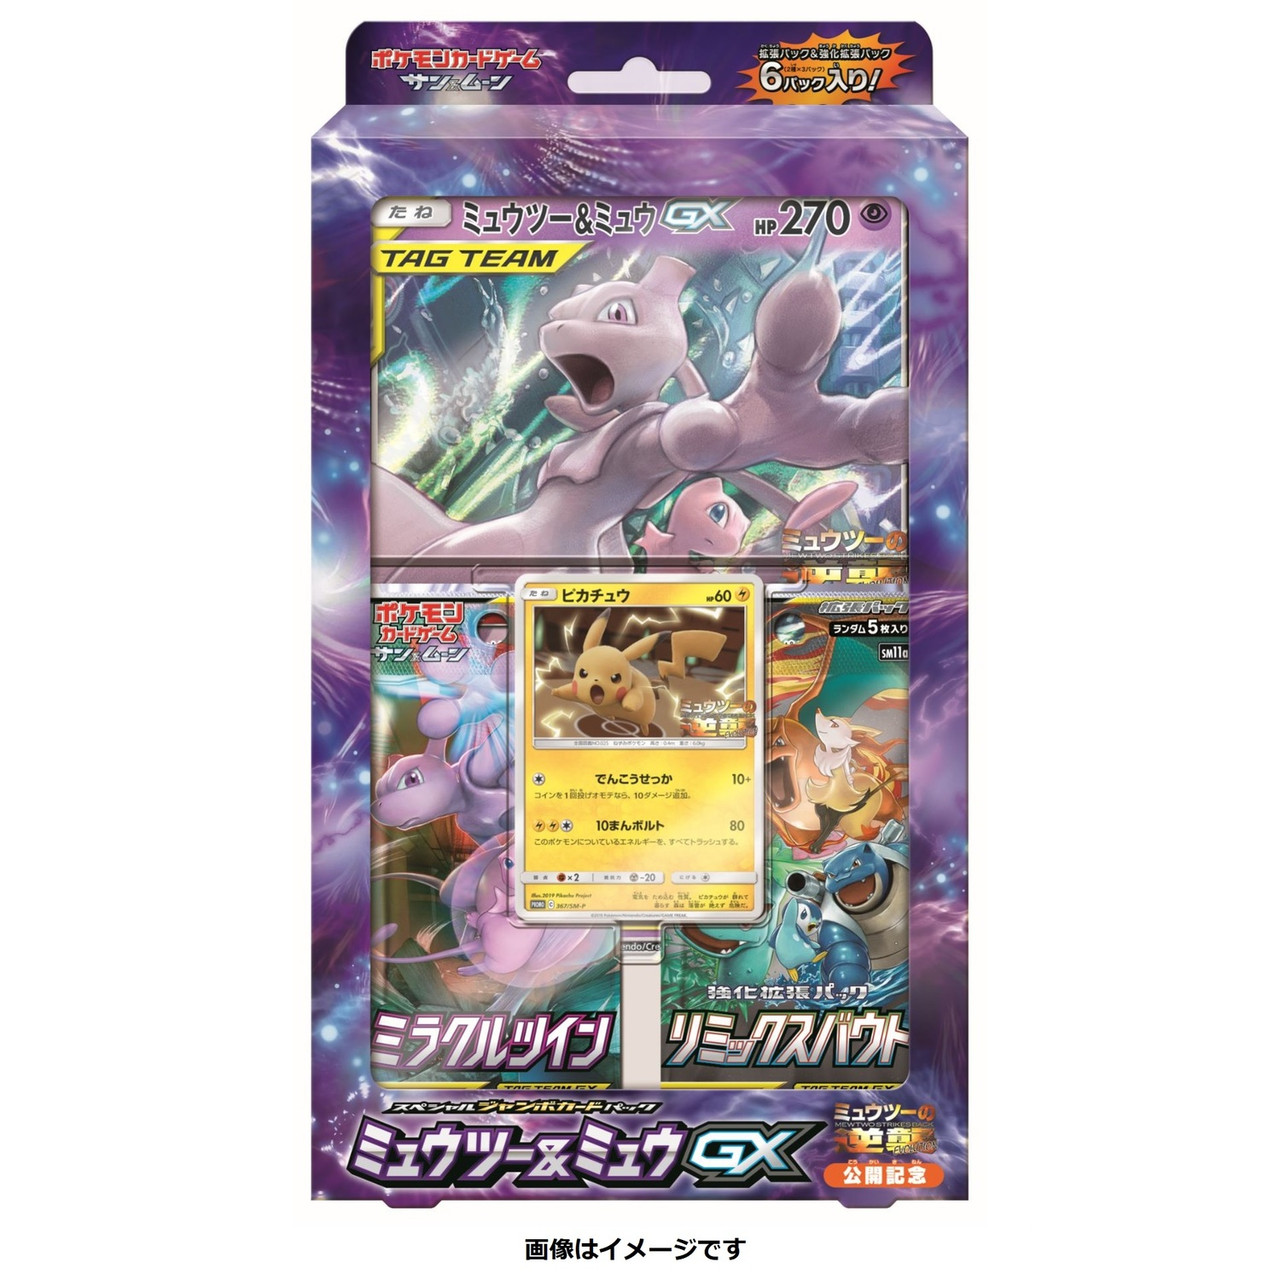 Mew Mewtwo Pokemon Cards, Collection Anime Cards Toys